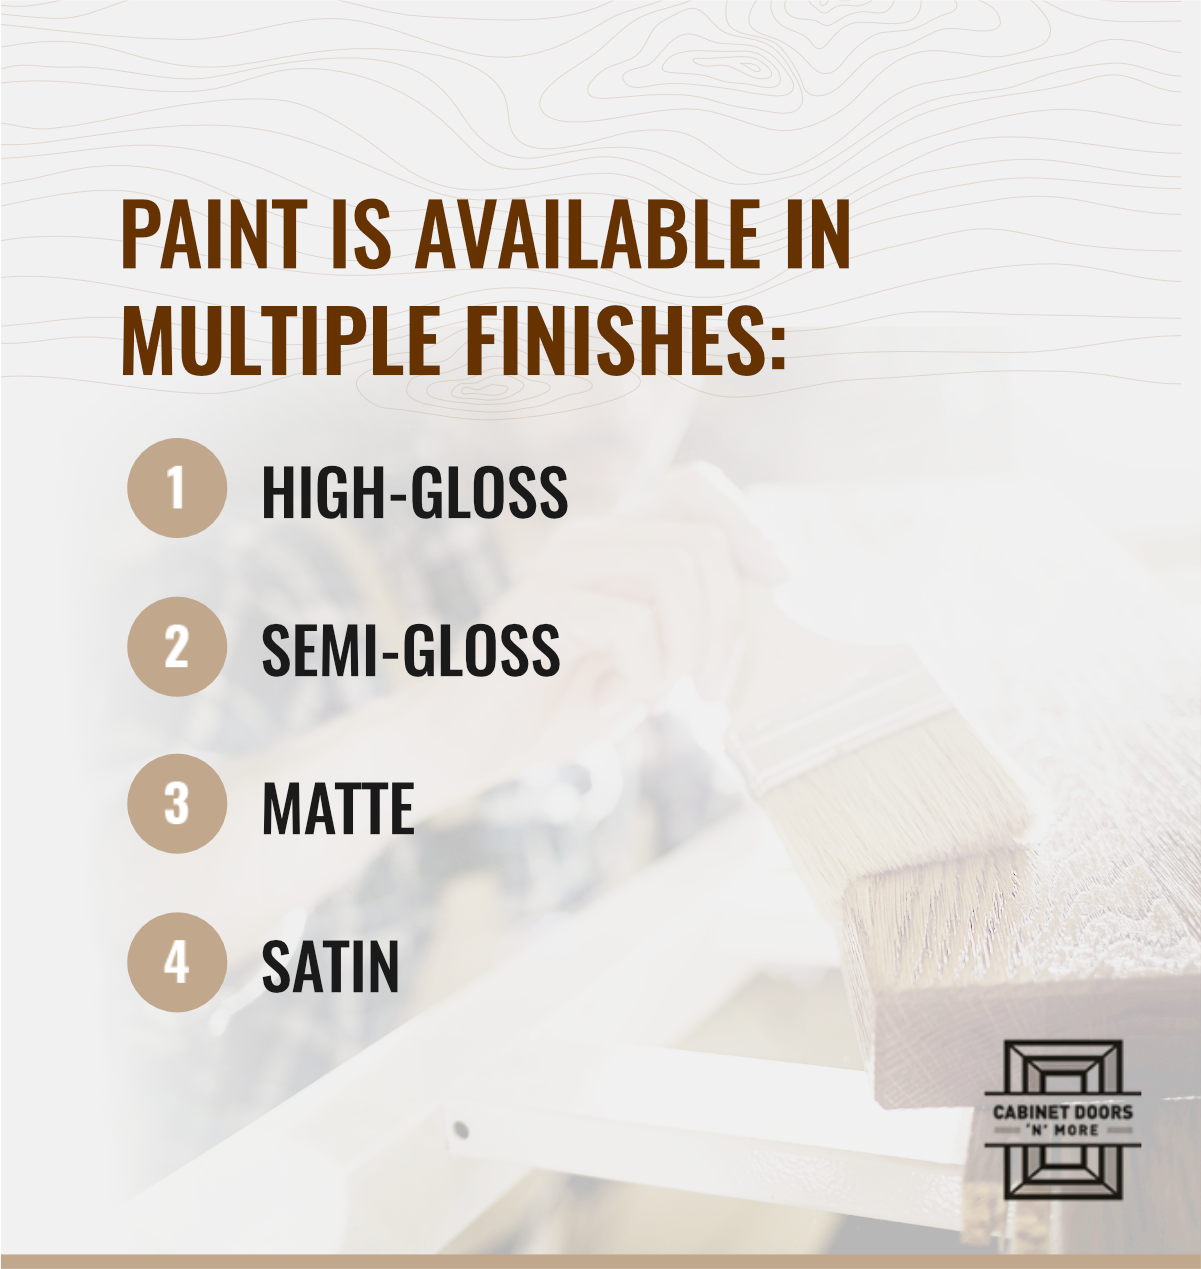 Paint is available in multiple finishes: